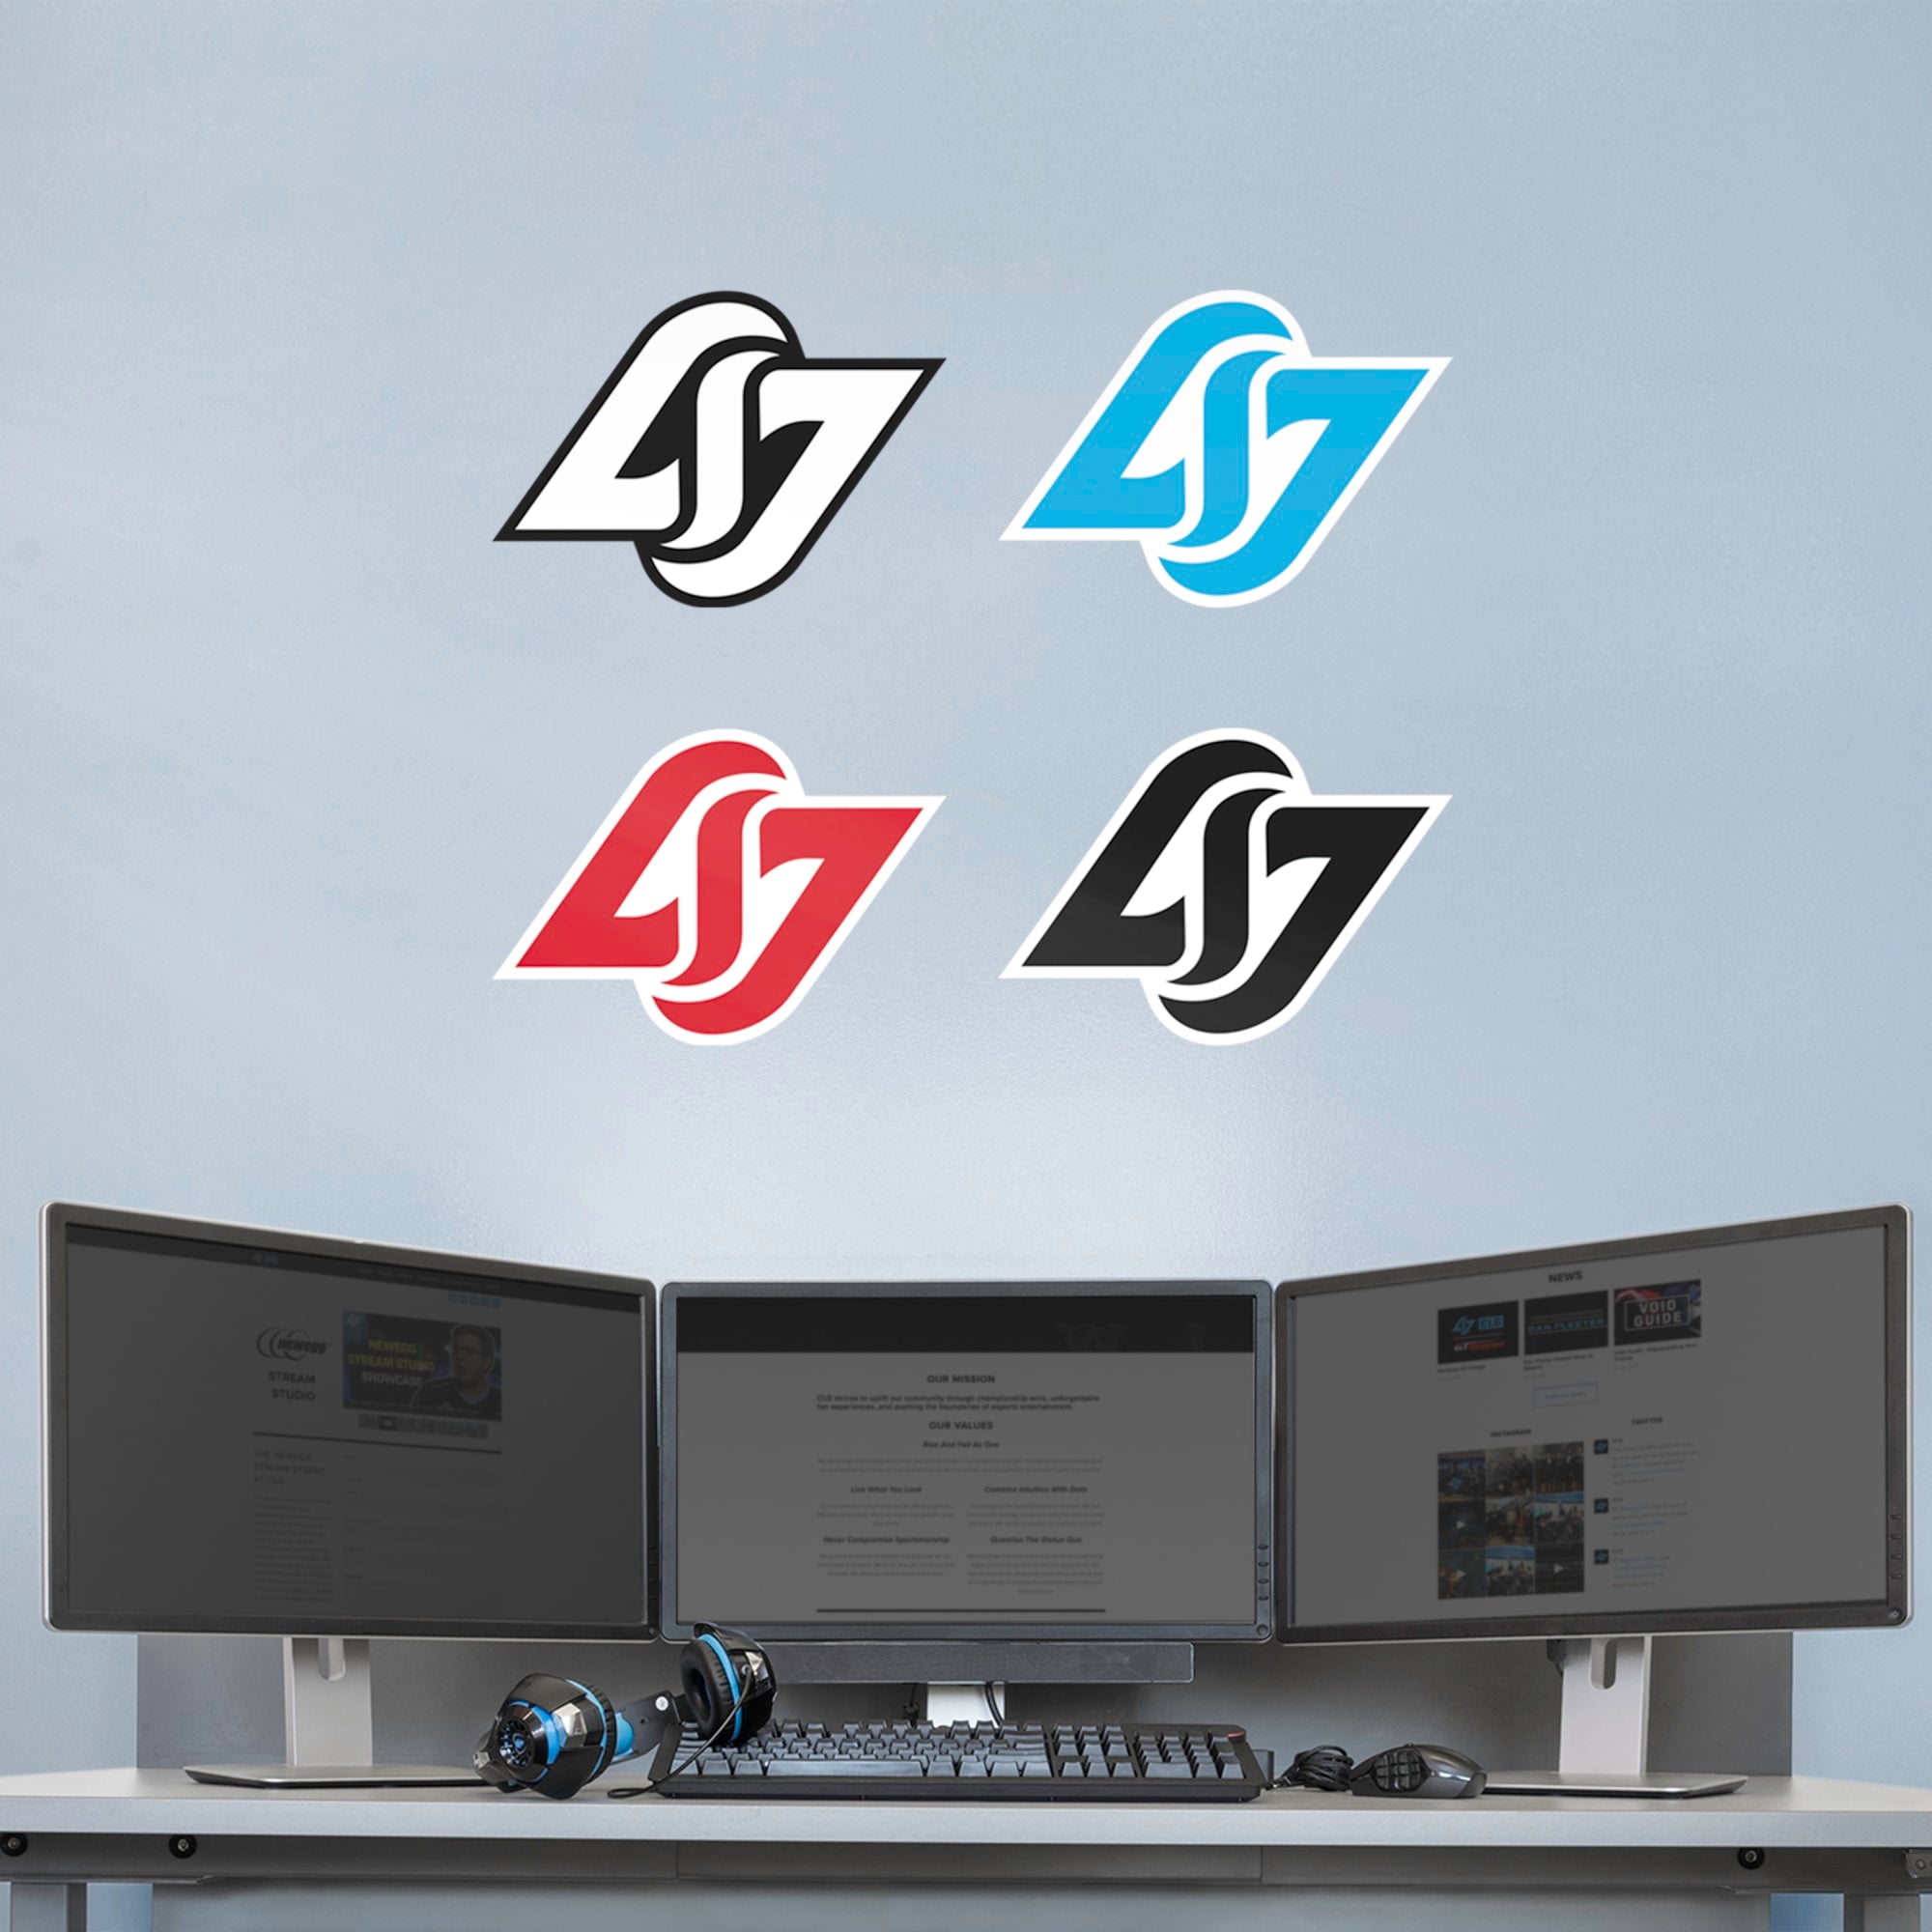 Counter Logic Gaming: Logo Collection - Officially Licensed Removable Wall Decal 14.0"W x 20.0"H by Fathead | Vinyl